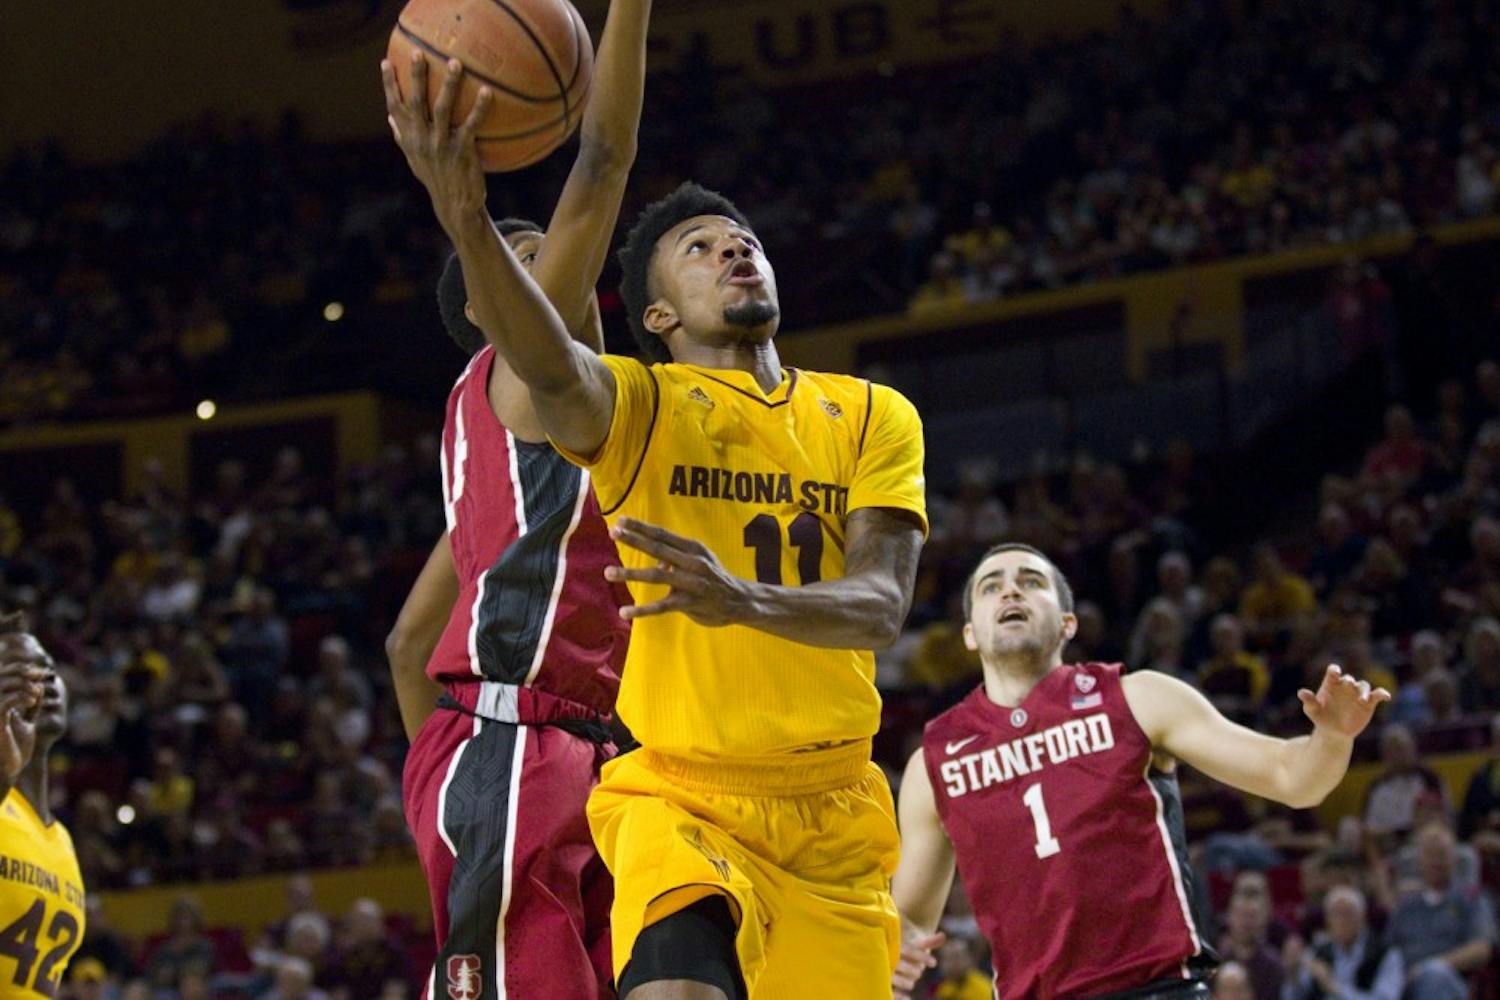 ASU junior guard Shannon Evans II (11) puts up a layup during a men's basketball game versus the University of Stanford Cardinal in Wells Fargo Arena in Tempe, Arizona on Saturday, Feb. 11, 2017. ASU won 75-69. (Josh Orcutt/State Press)